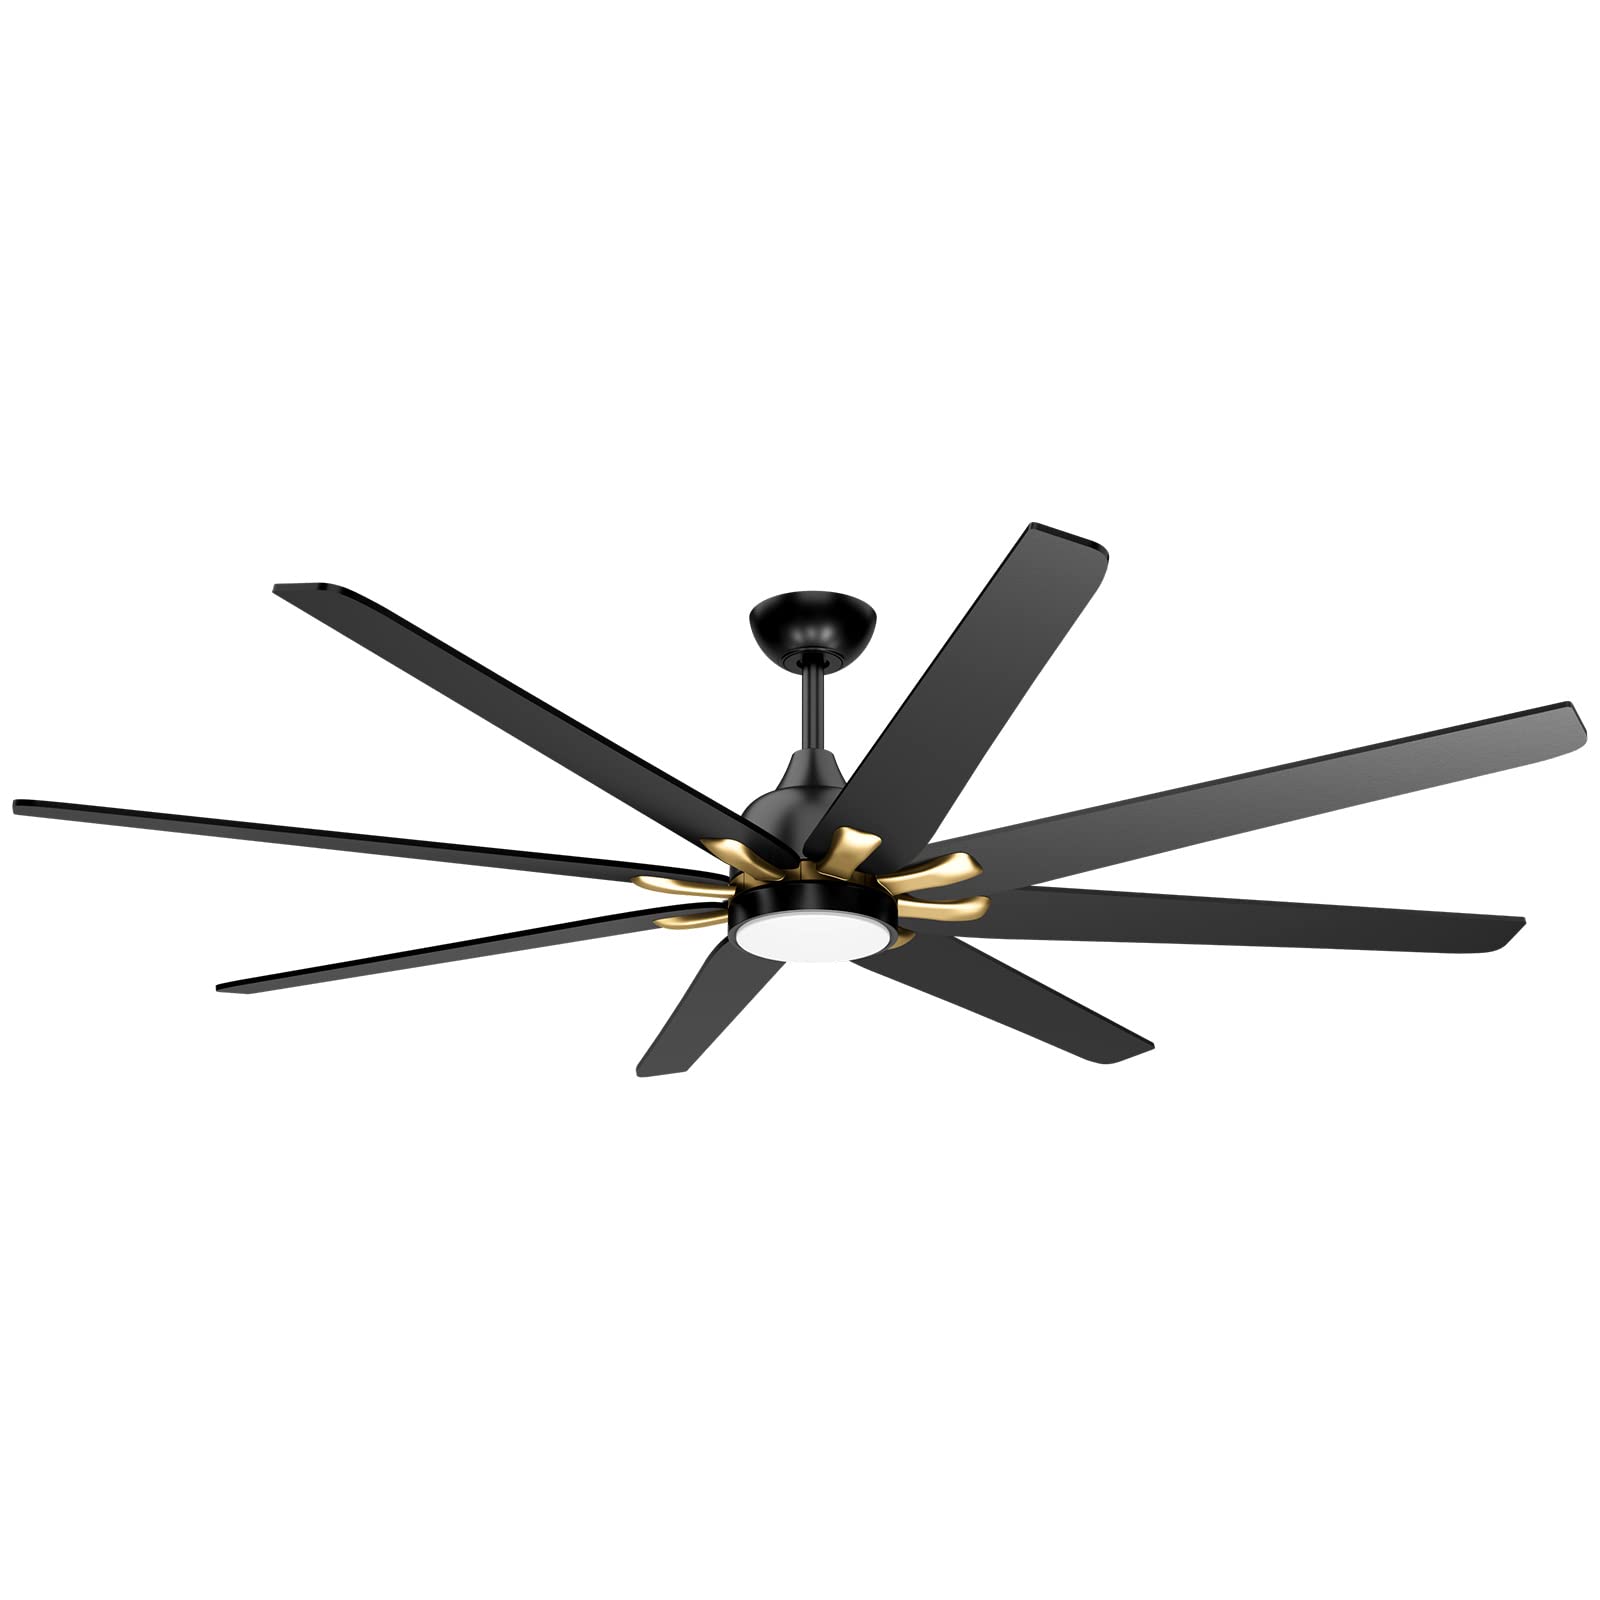 wurzee 72" Large Industrial Ceiling Fans with Light, 6 Speed, Reversible DC Motor